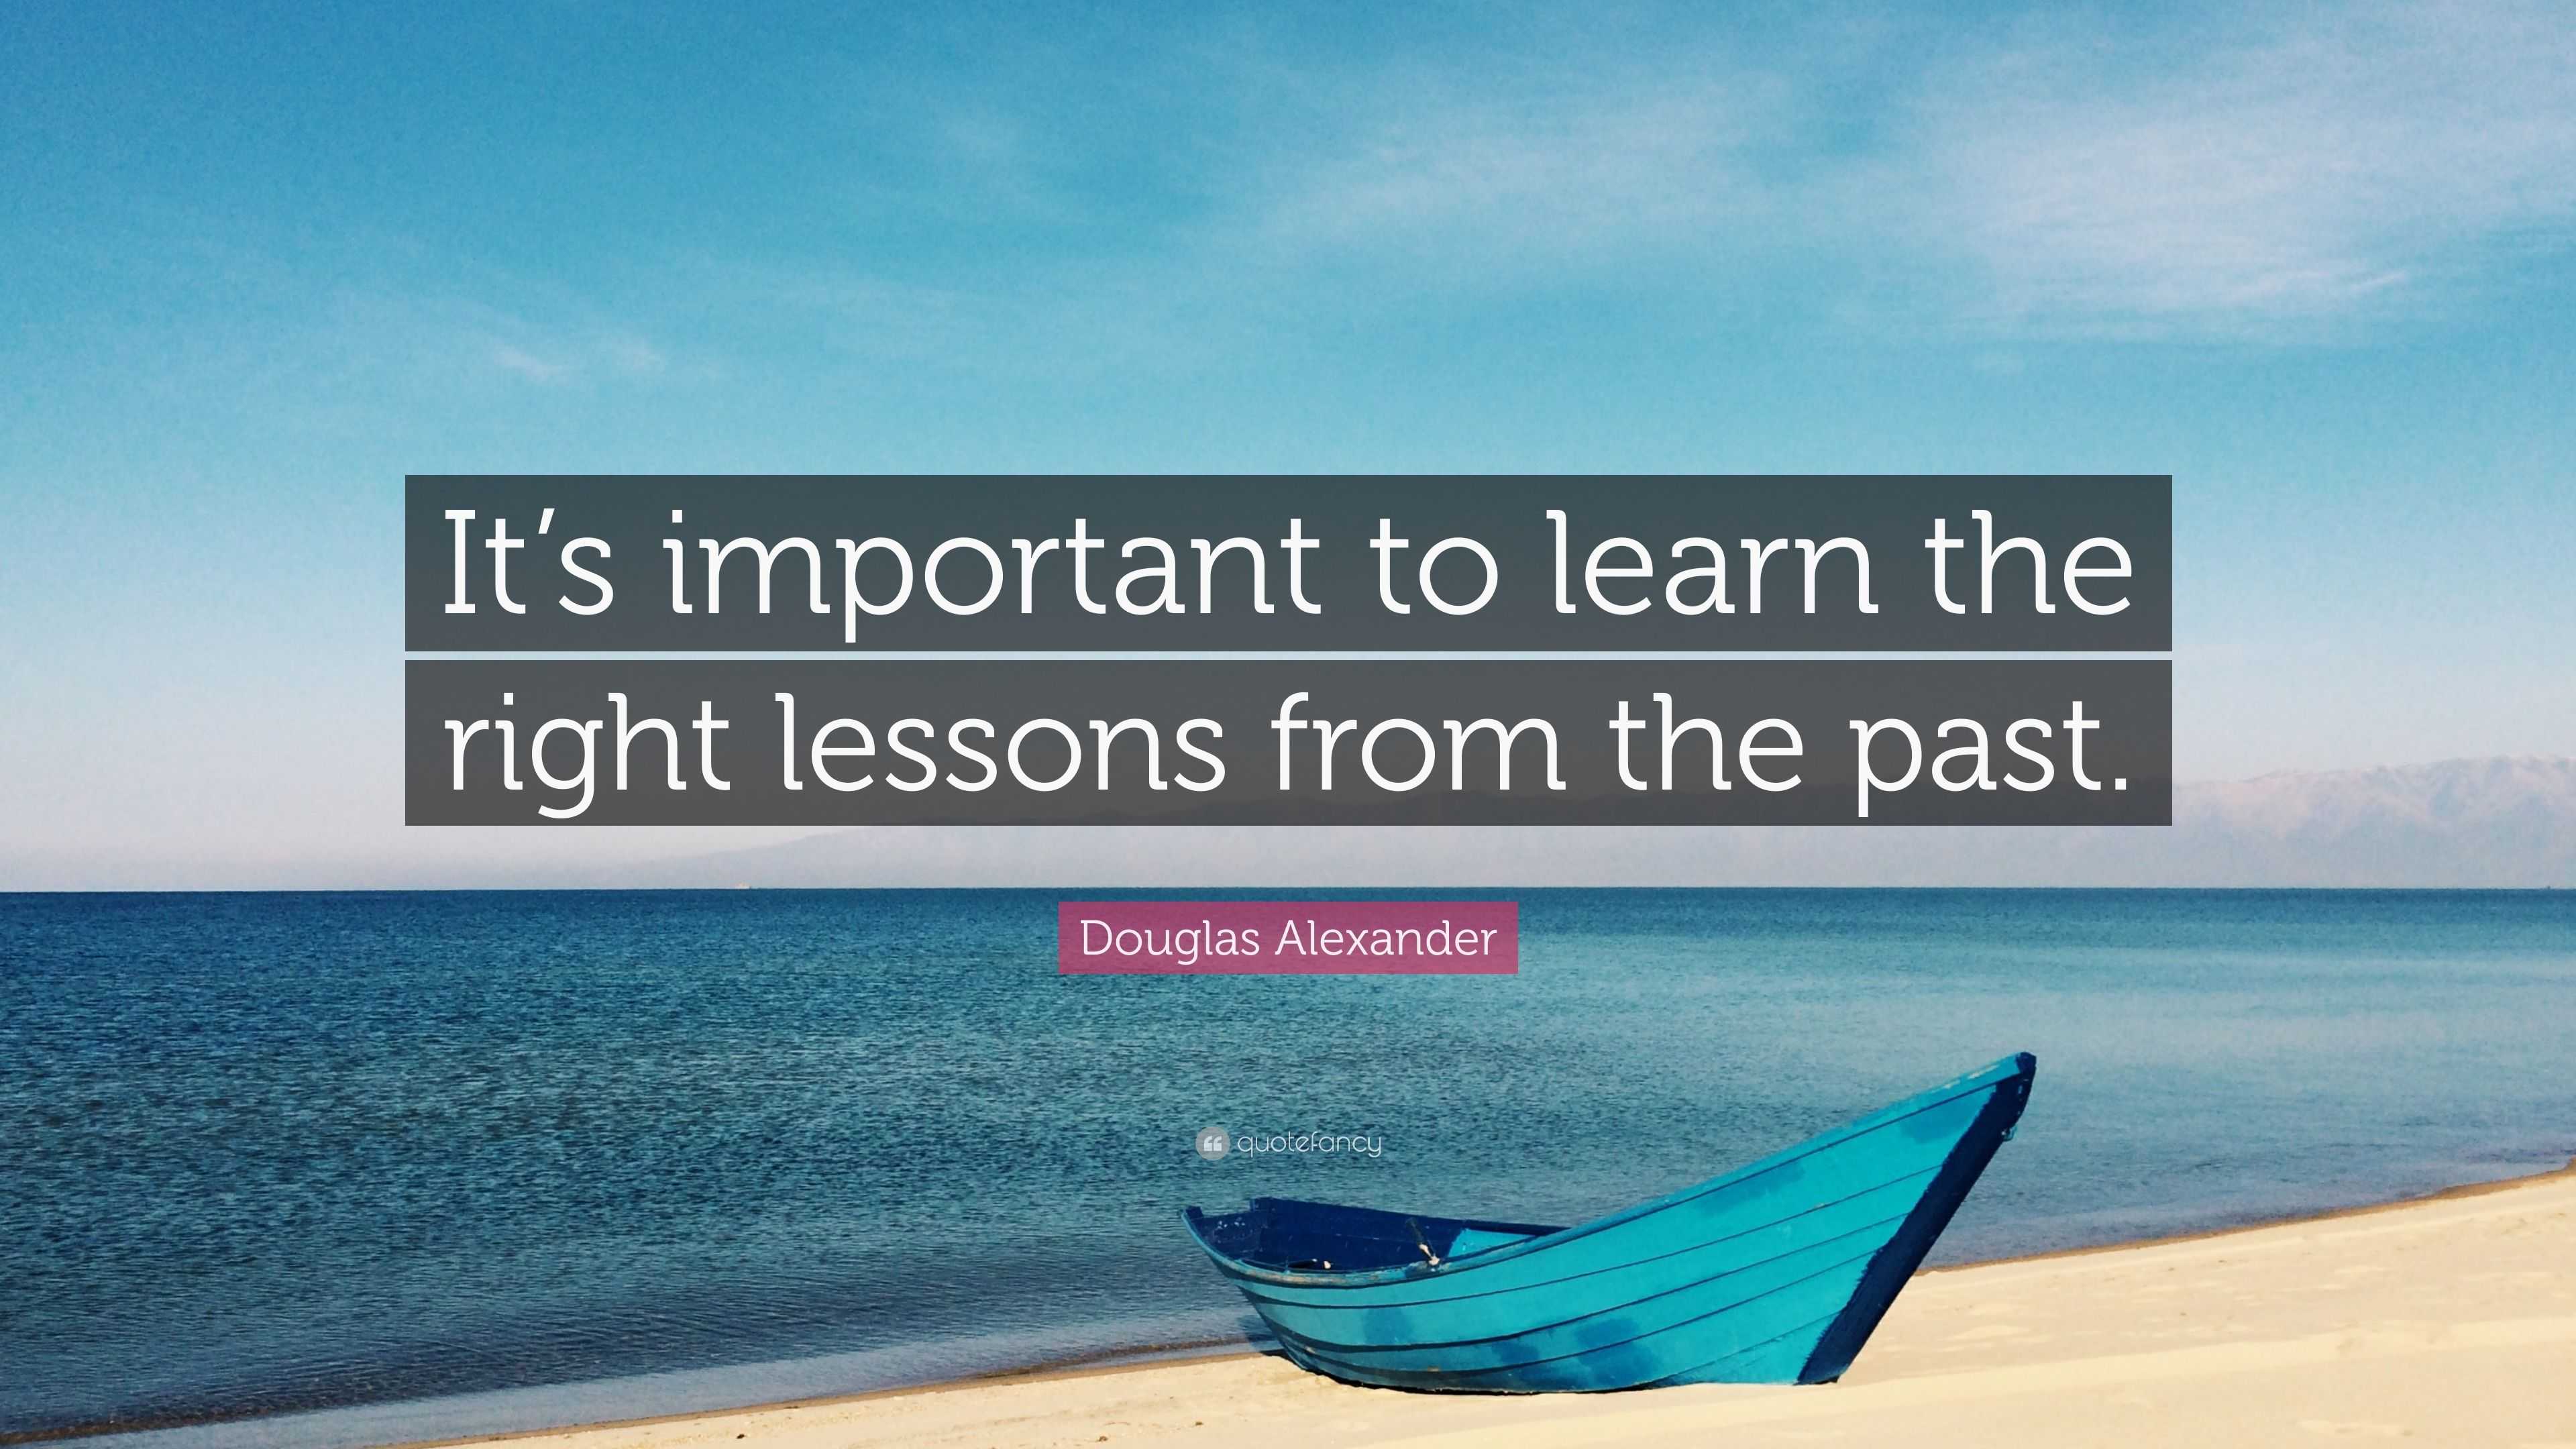 Douglas Alexander Quote: “It's important to learn the right